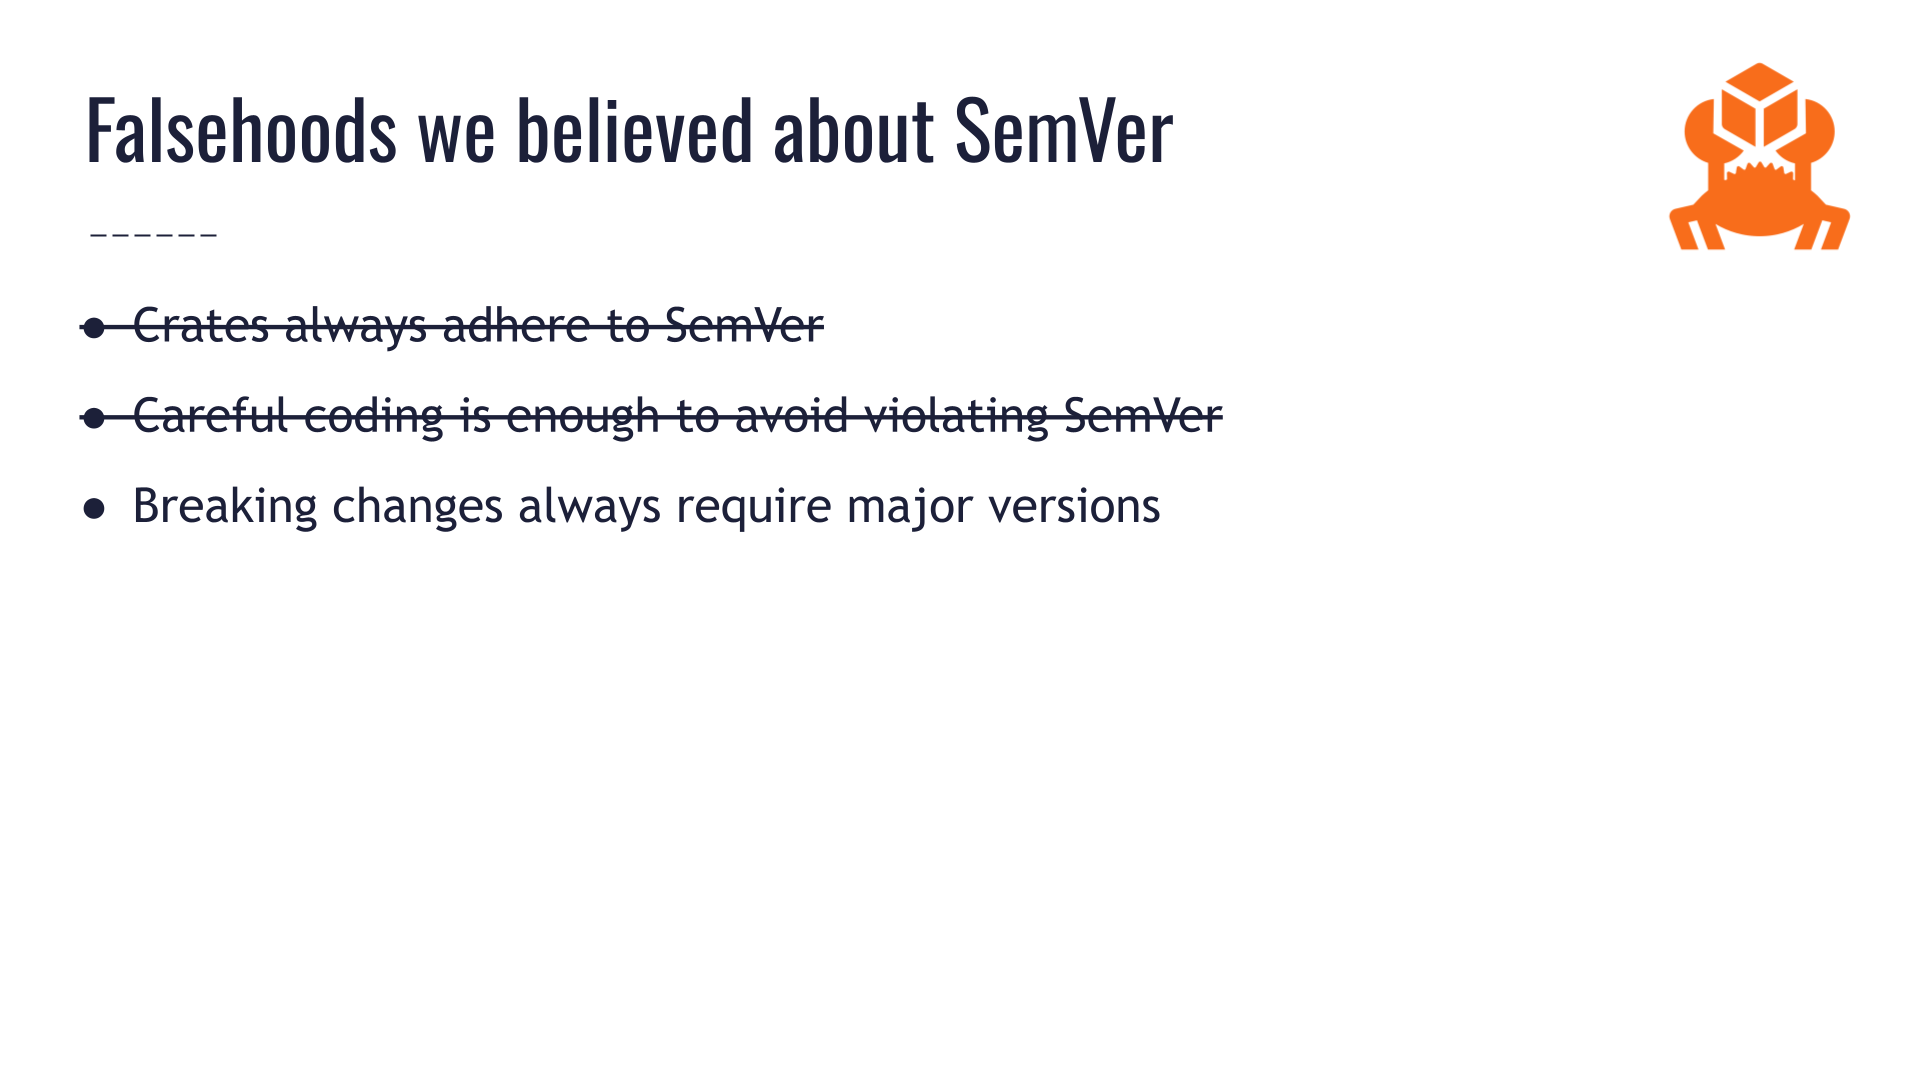 The same slide titled "Falsehoods we believed about SemVer" from earlier. This time the second bullet point, "careful coding is enough to avoid violating SemVer," is also crossed off. A third bullet point says "Breaking changes always require major versions." There is still plenty of blank space left where more items can be added to the list.